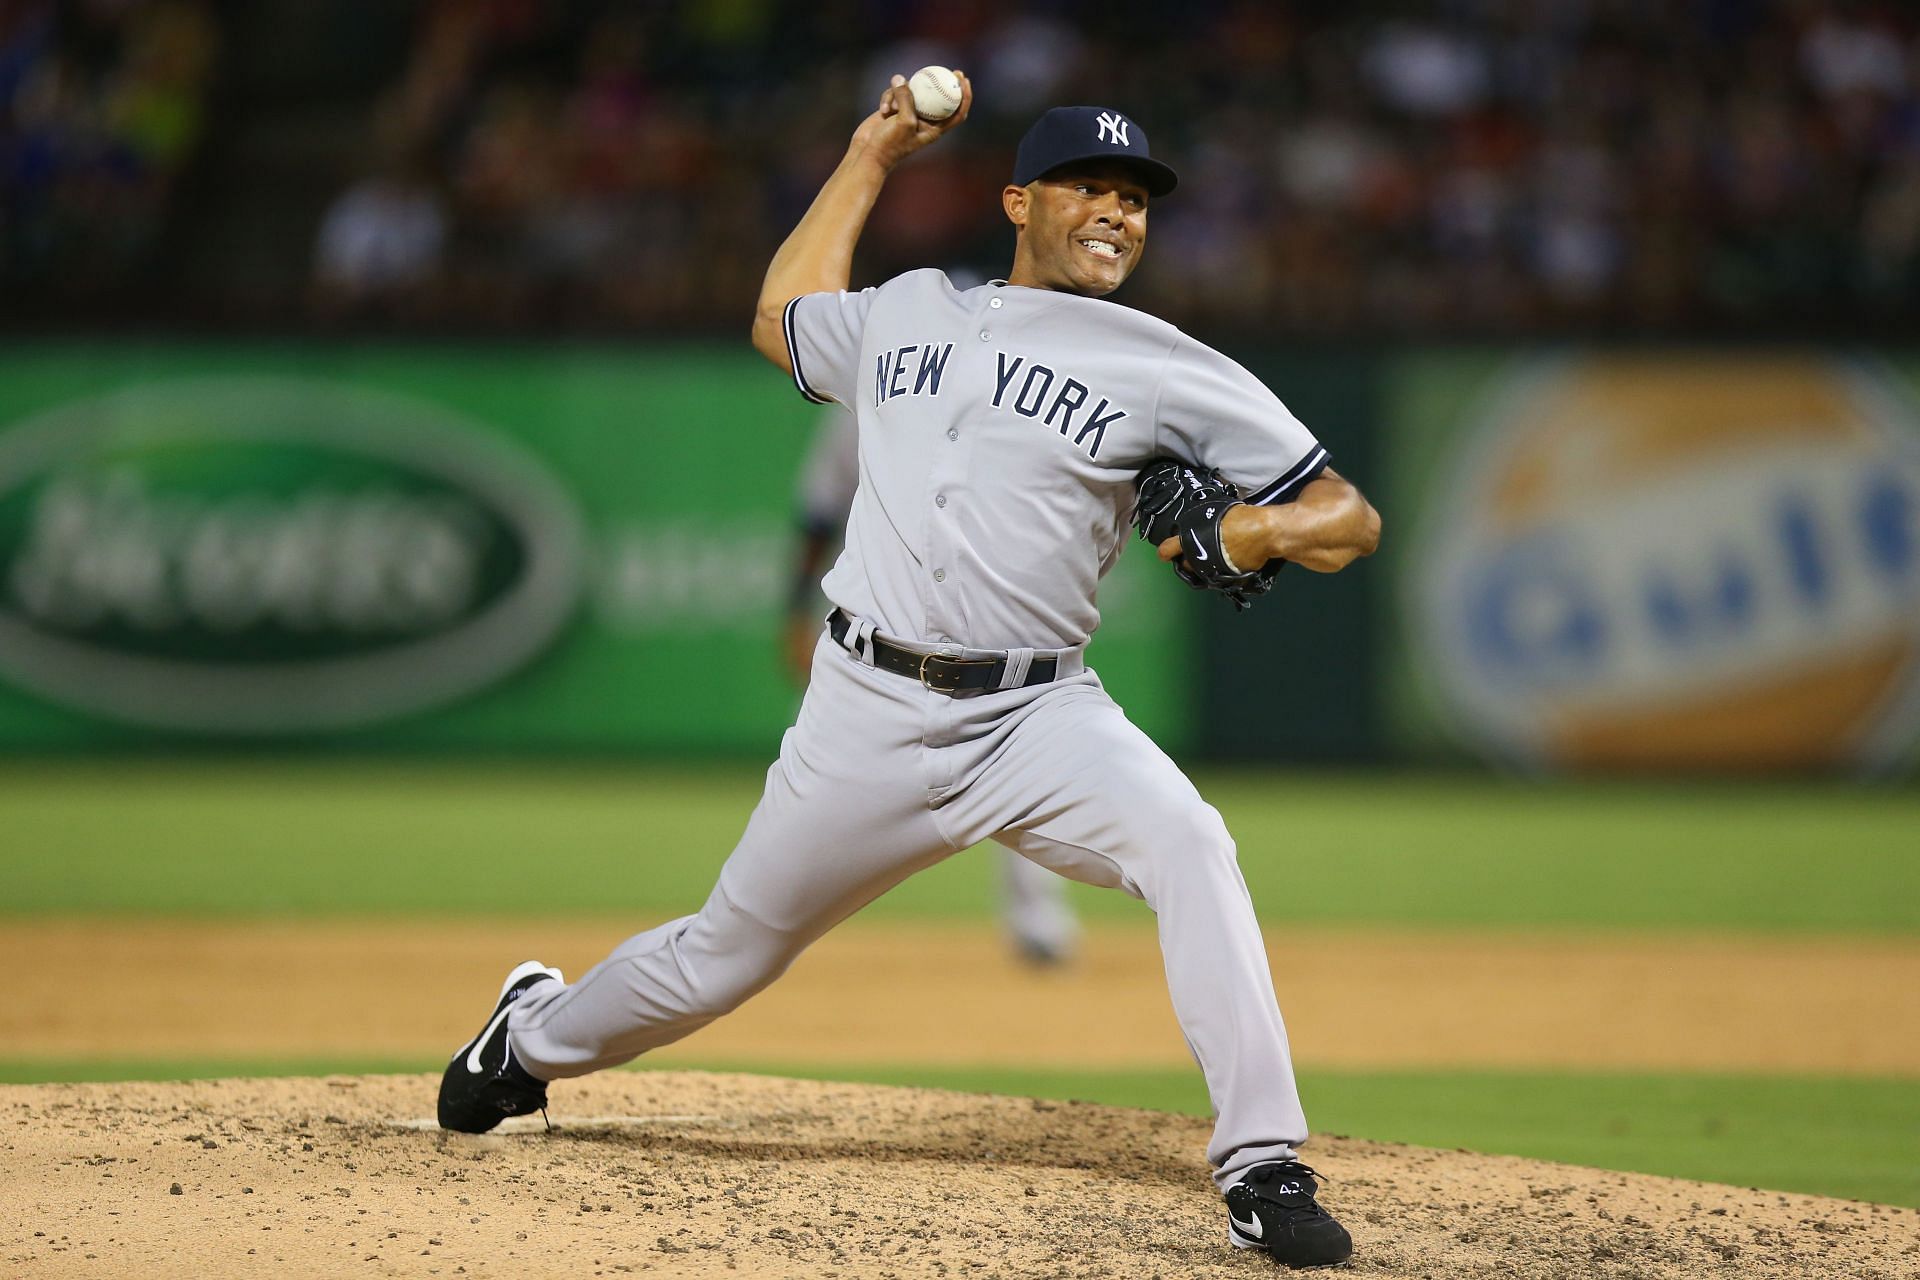 Yankees legend, Mariano Rivera missed the rest of the 2012 MLB season following an ACL injury